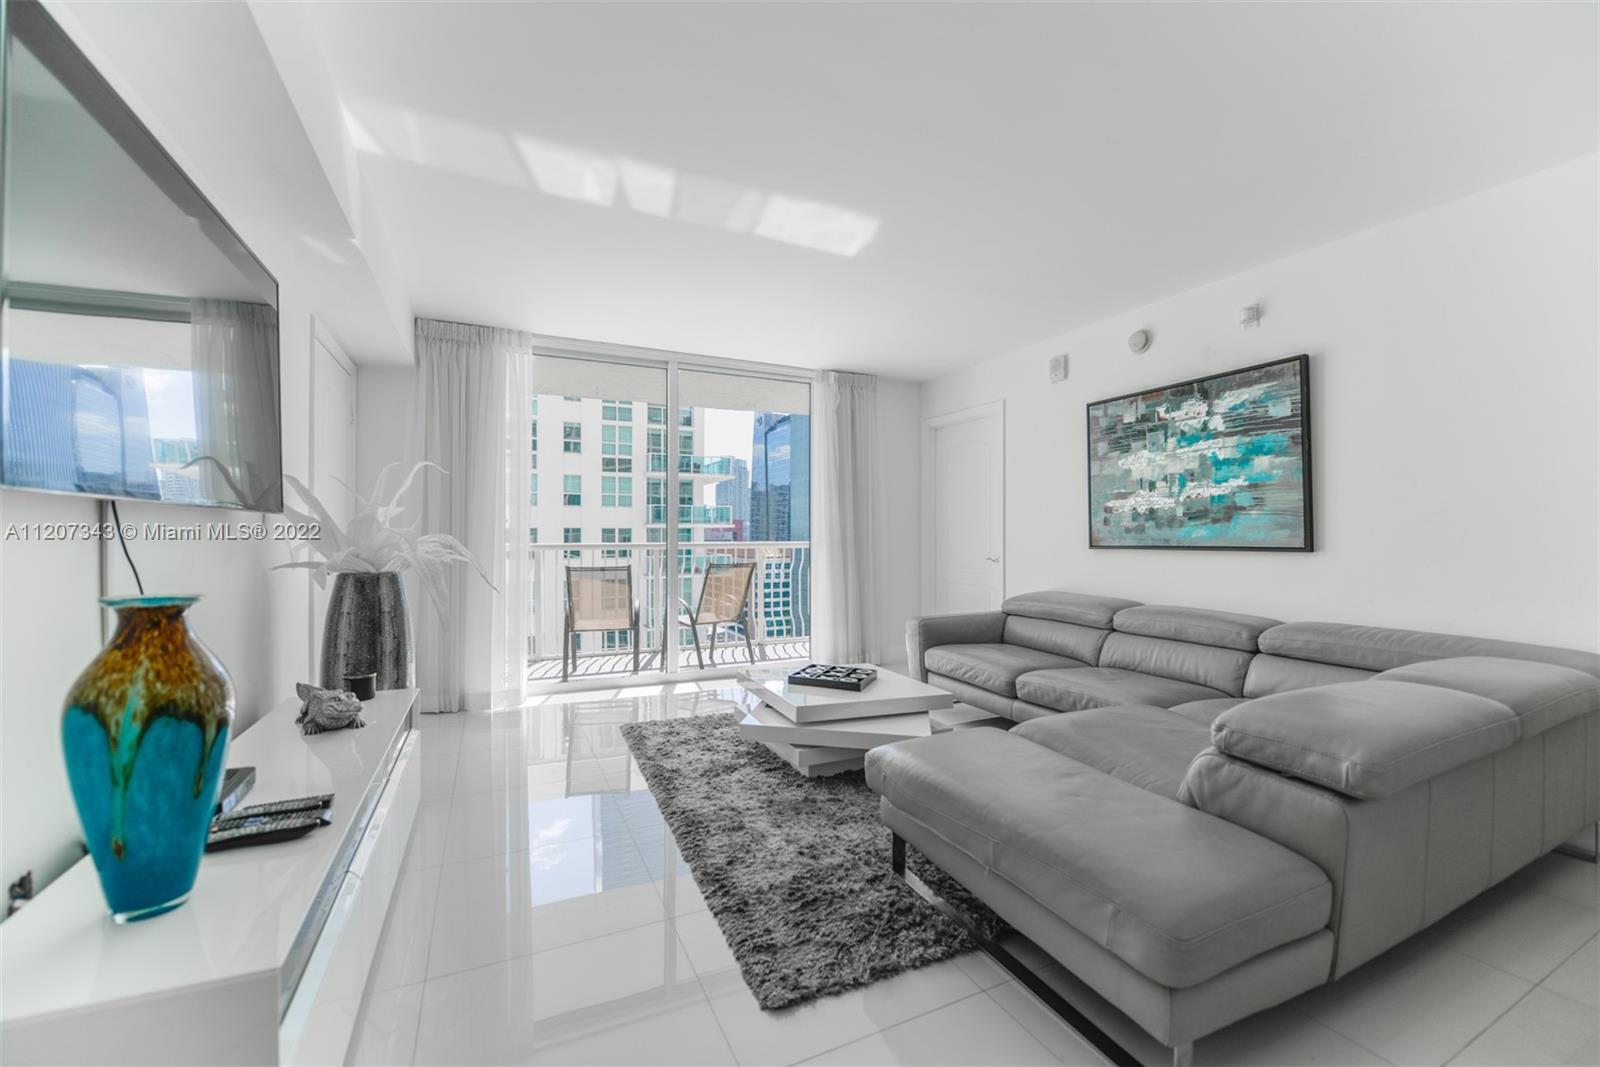 Amazing 2/2 apartment right on brickell bay with an ocean view, fantastic location. The property is 